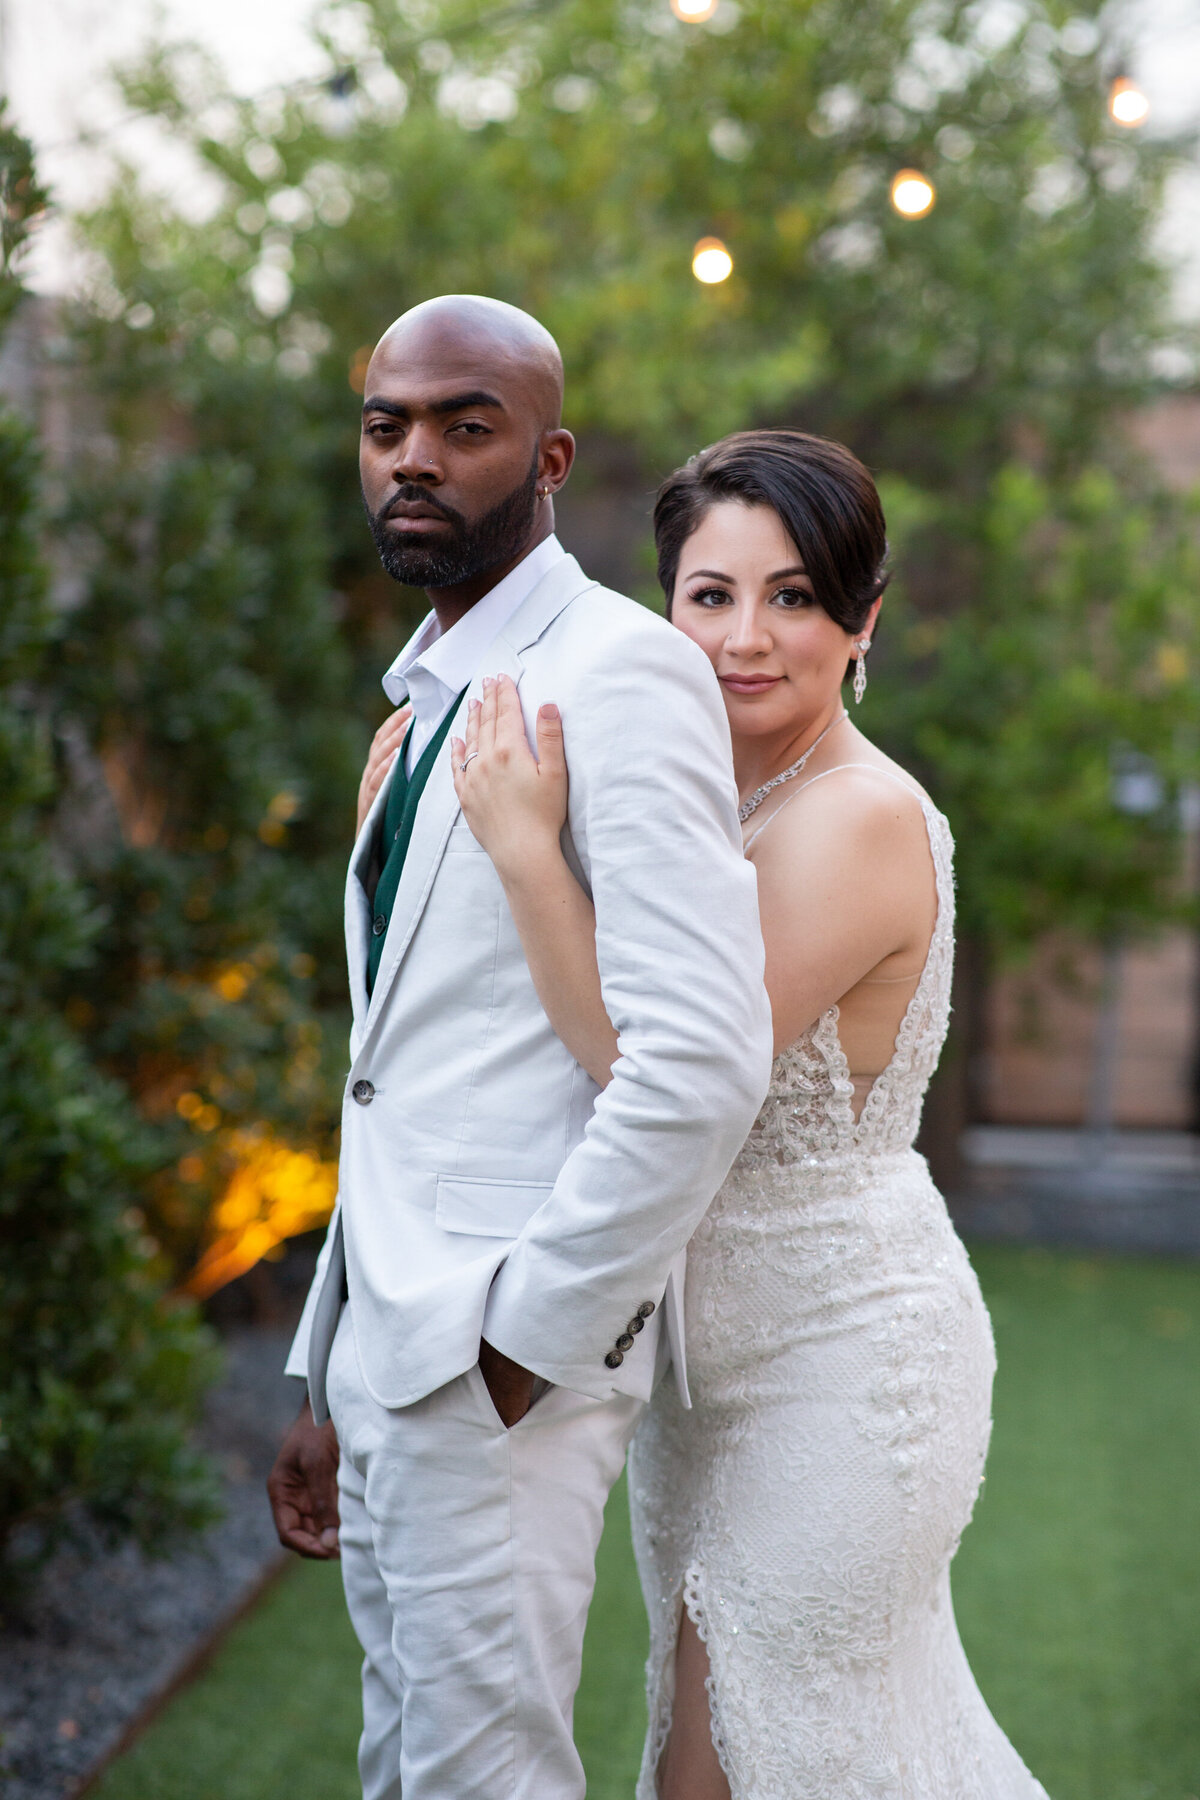 A bride and groom, captured by an Austin wedding photographer, posing for a photo in a garden.